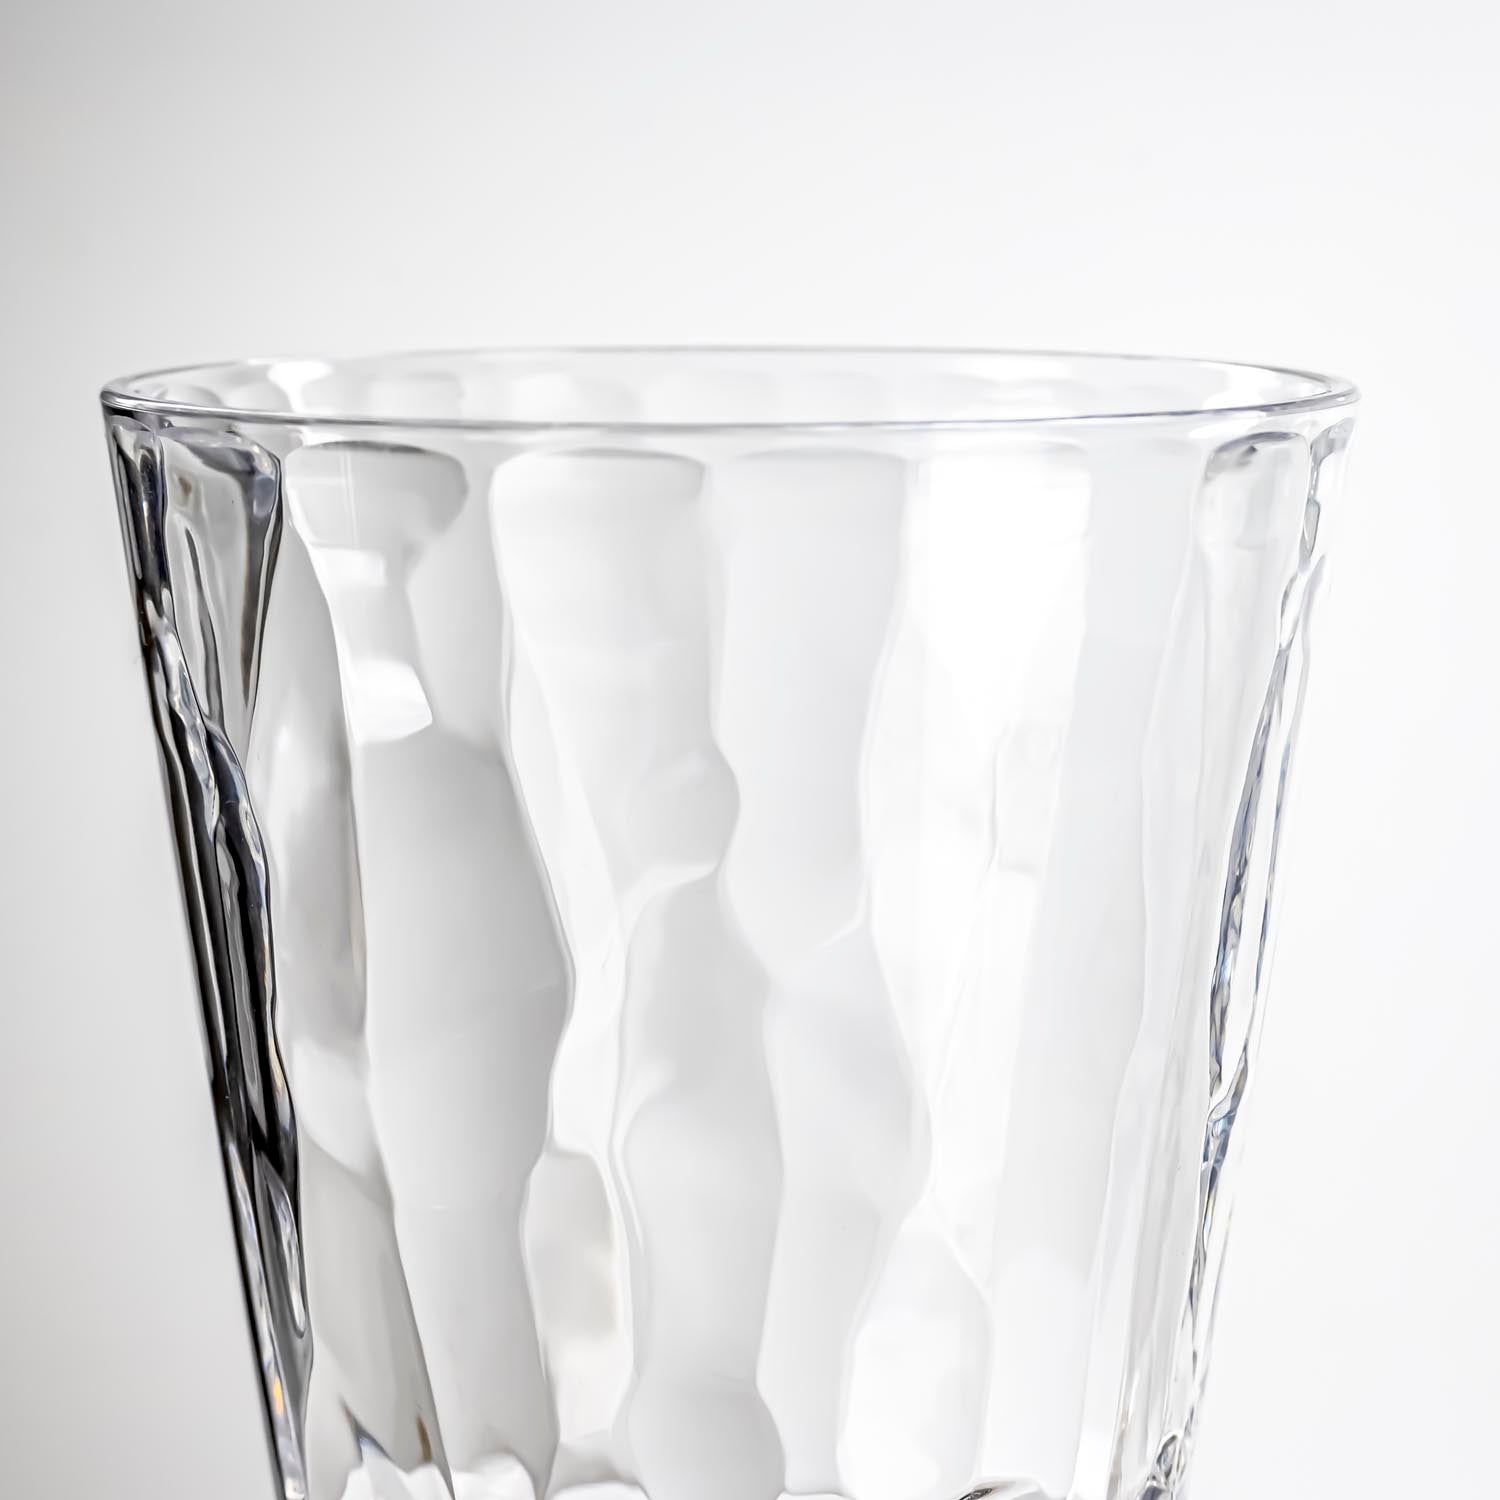 14-ounce clear acrylic tumbler glass from the Merritt Designs Cascade collection. Detailed view on white background